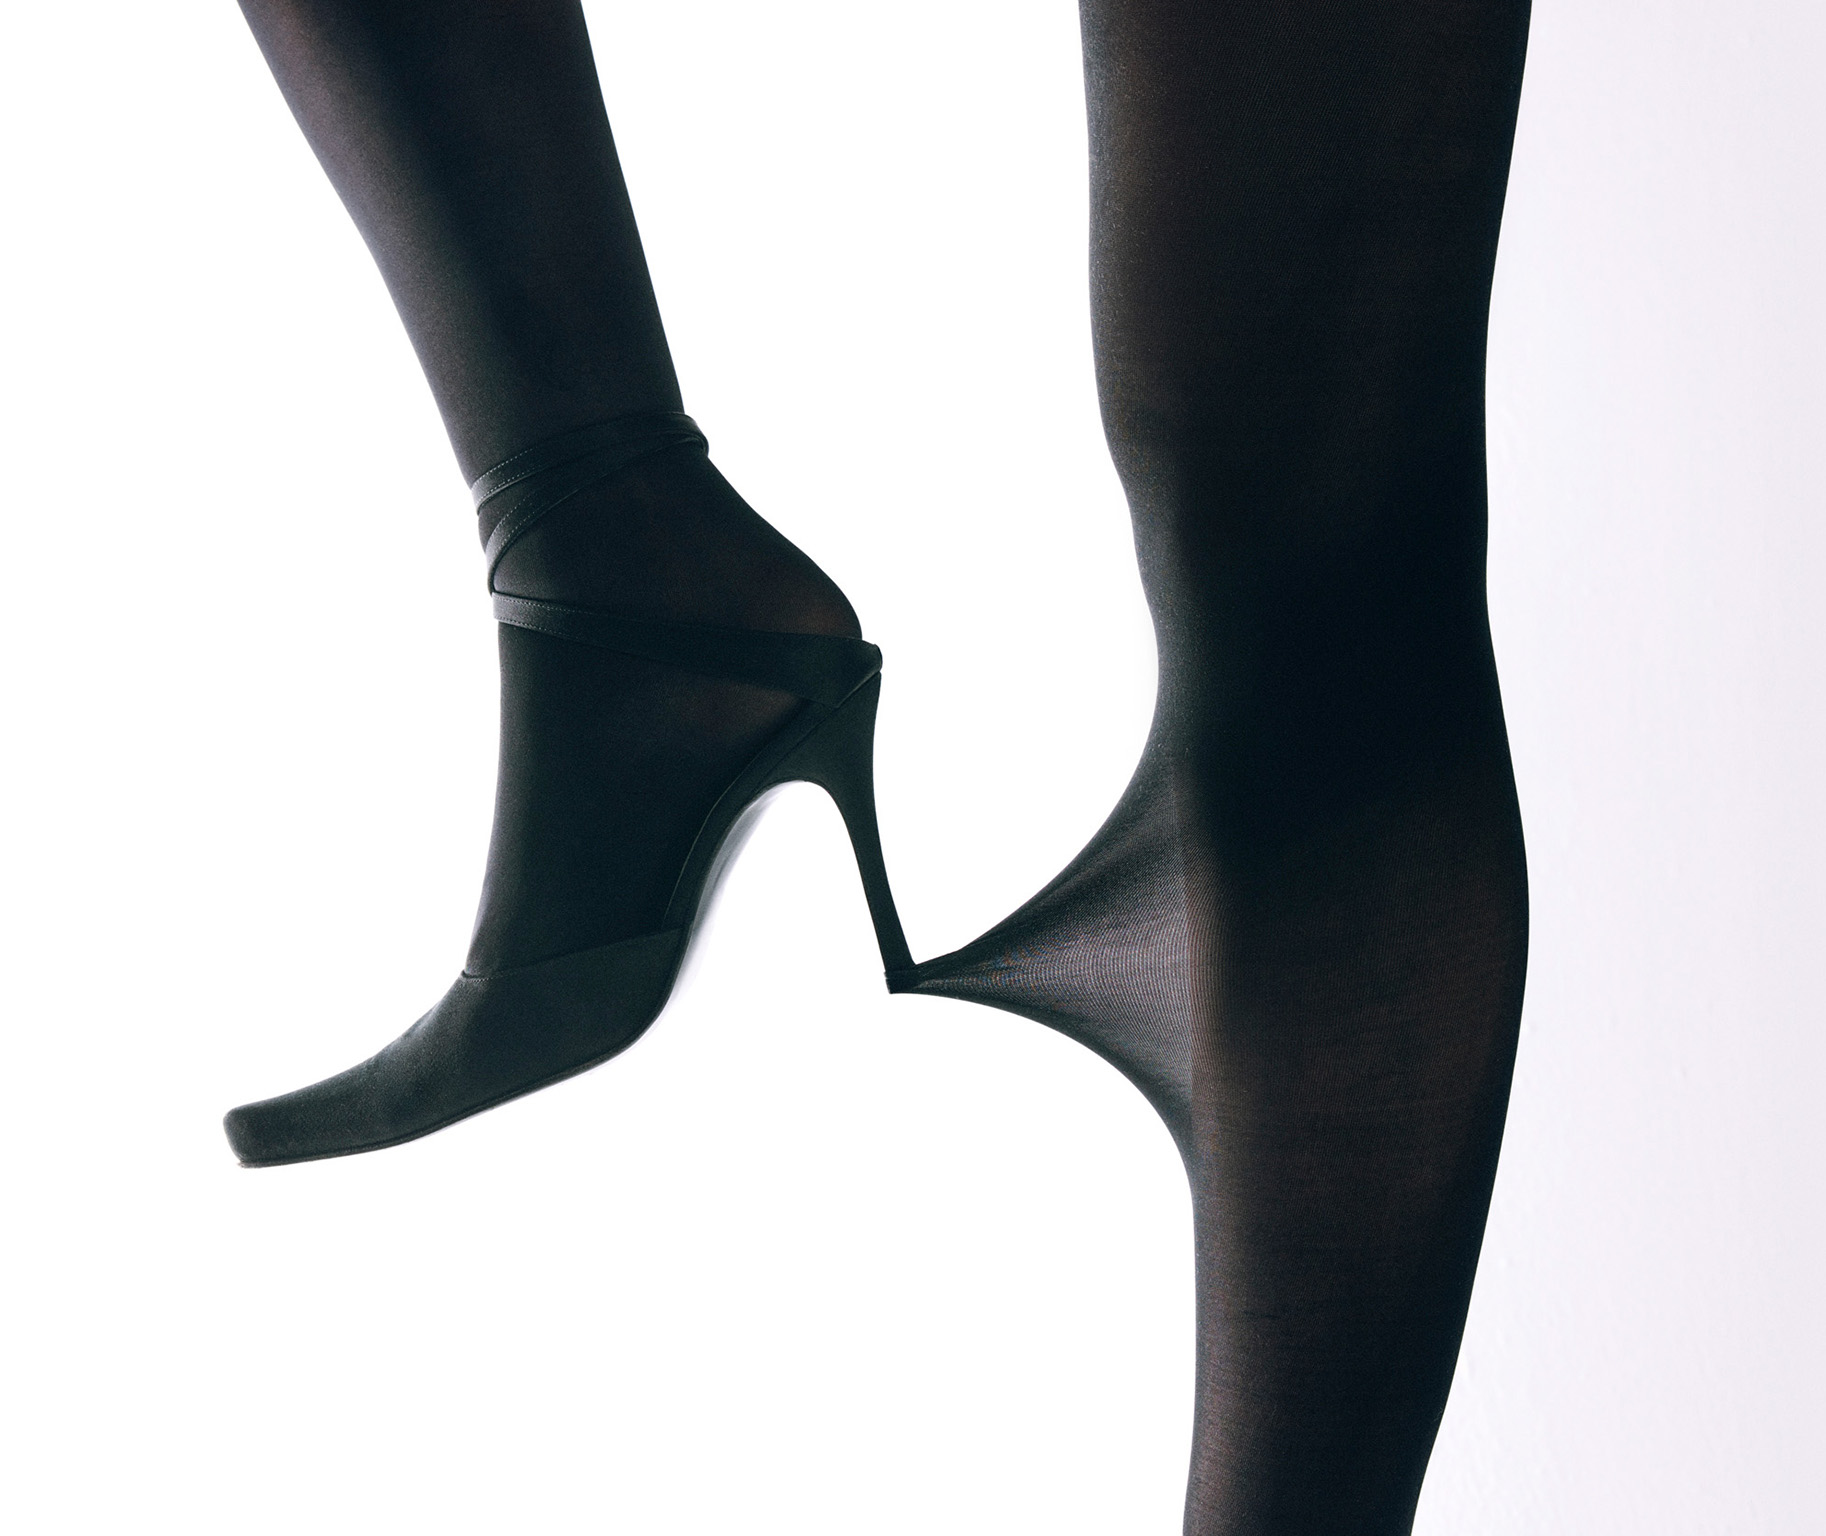 high heel shoe pulling on tights-covered leg